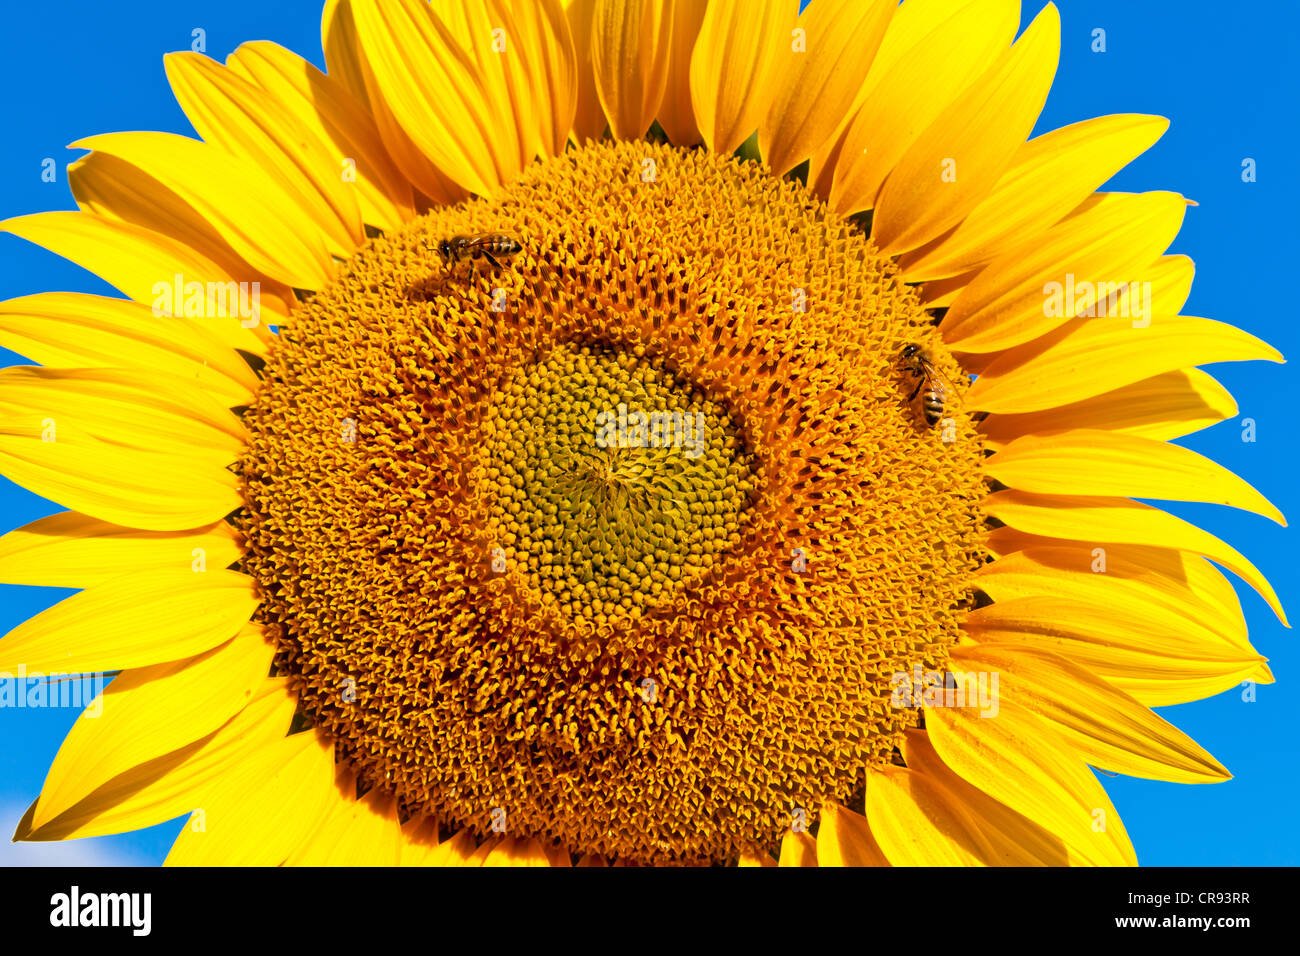 Close up of a Sunflower (Helianthus anuus) with bees (Apis sp.) collecting nectar, Umbria, Italy, Europe, Europe Stock Photo